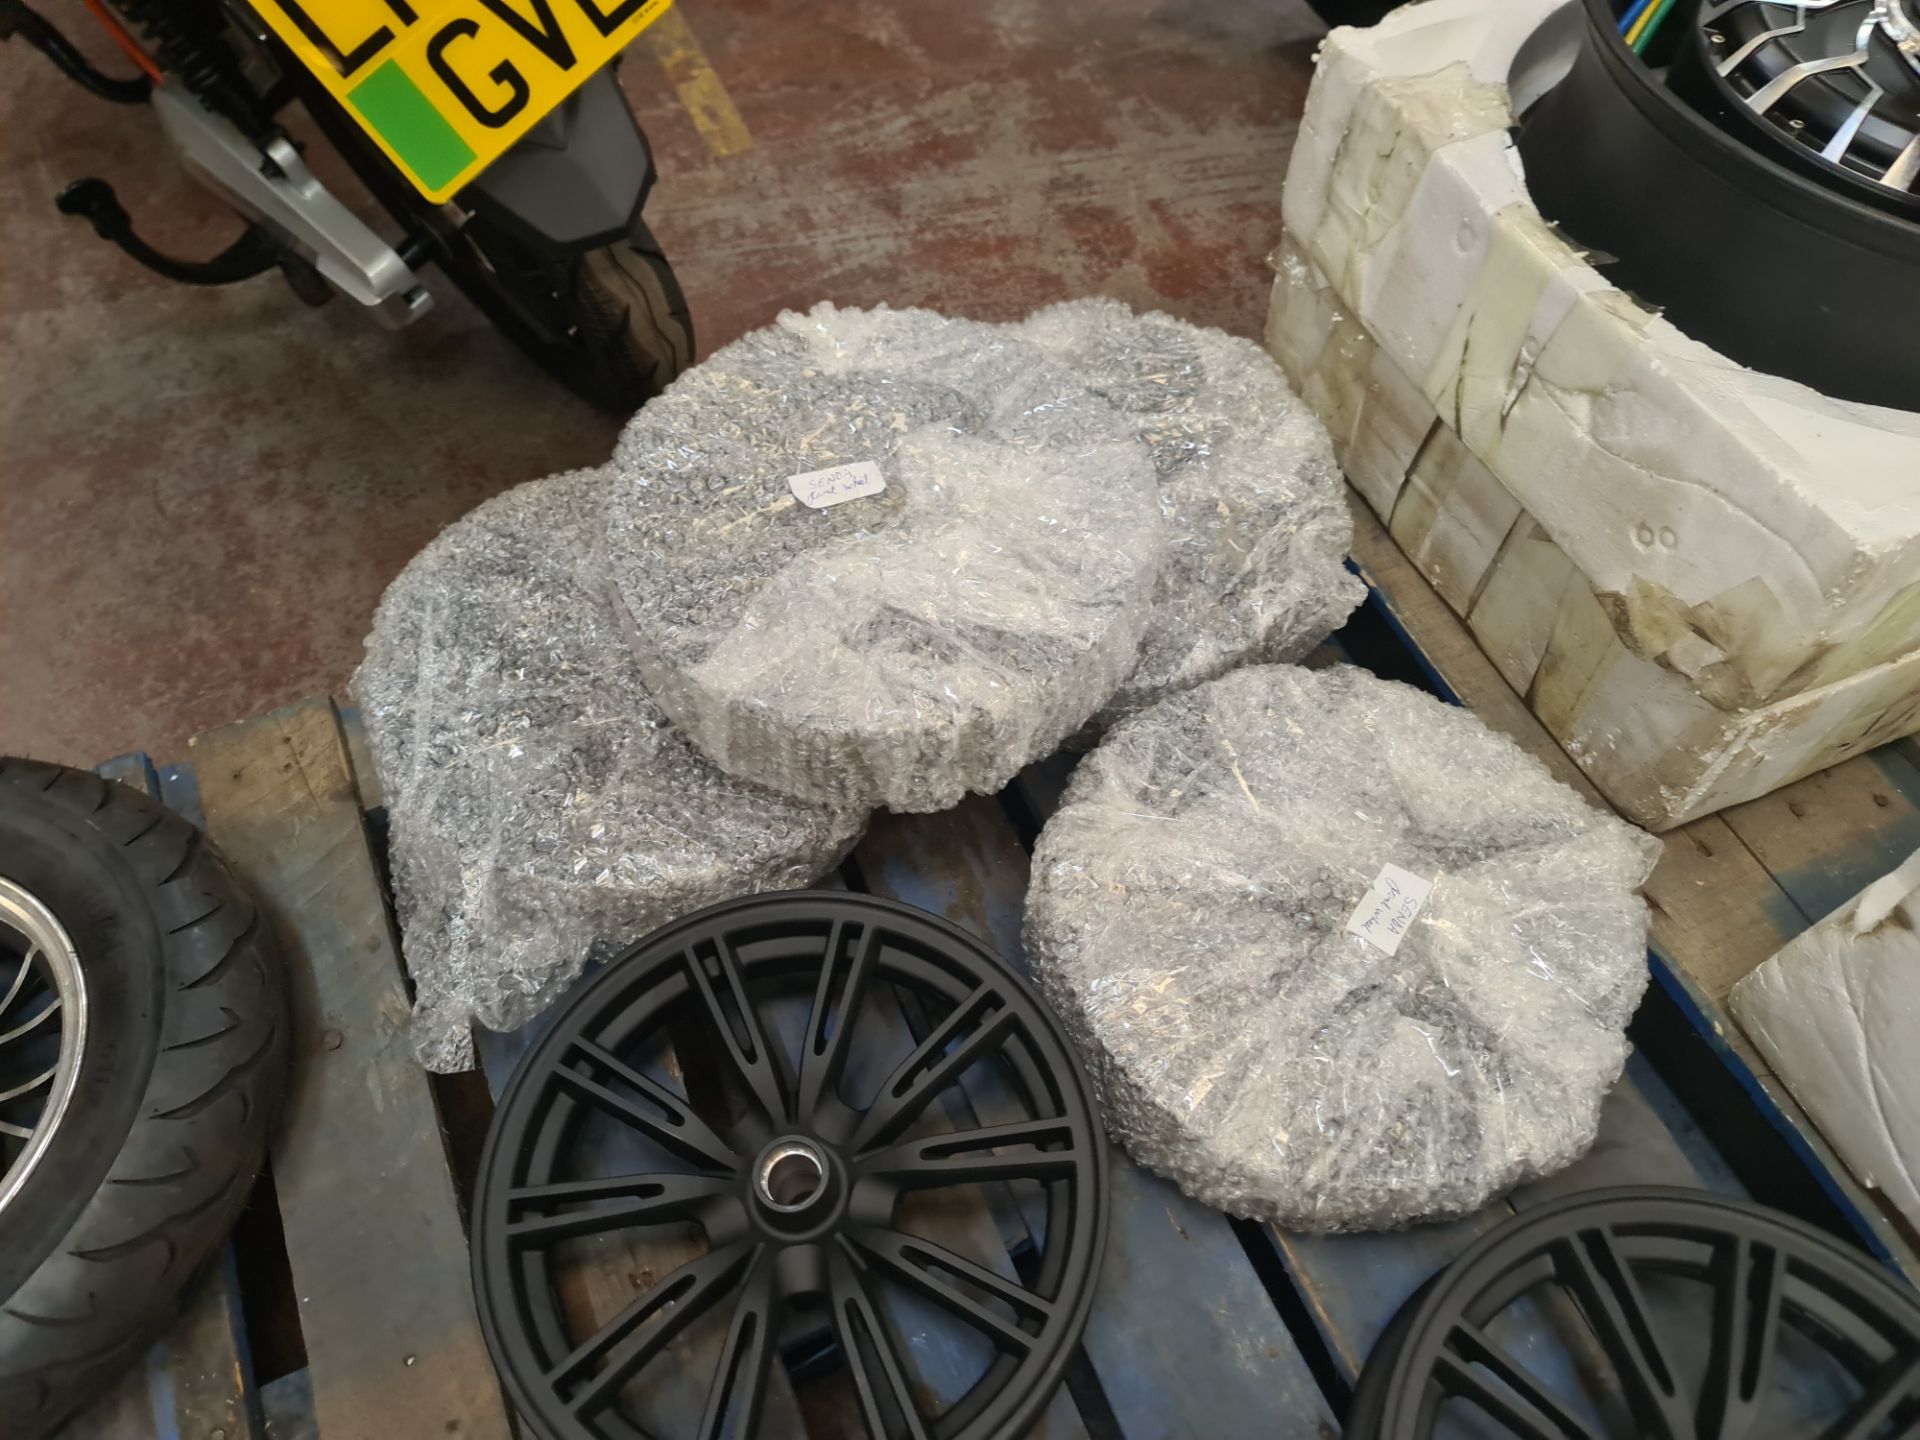 9 off assorted bike front wheels, the contents of a pallet - Image 5 of 7